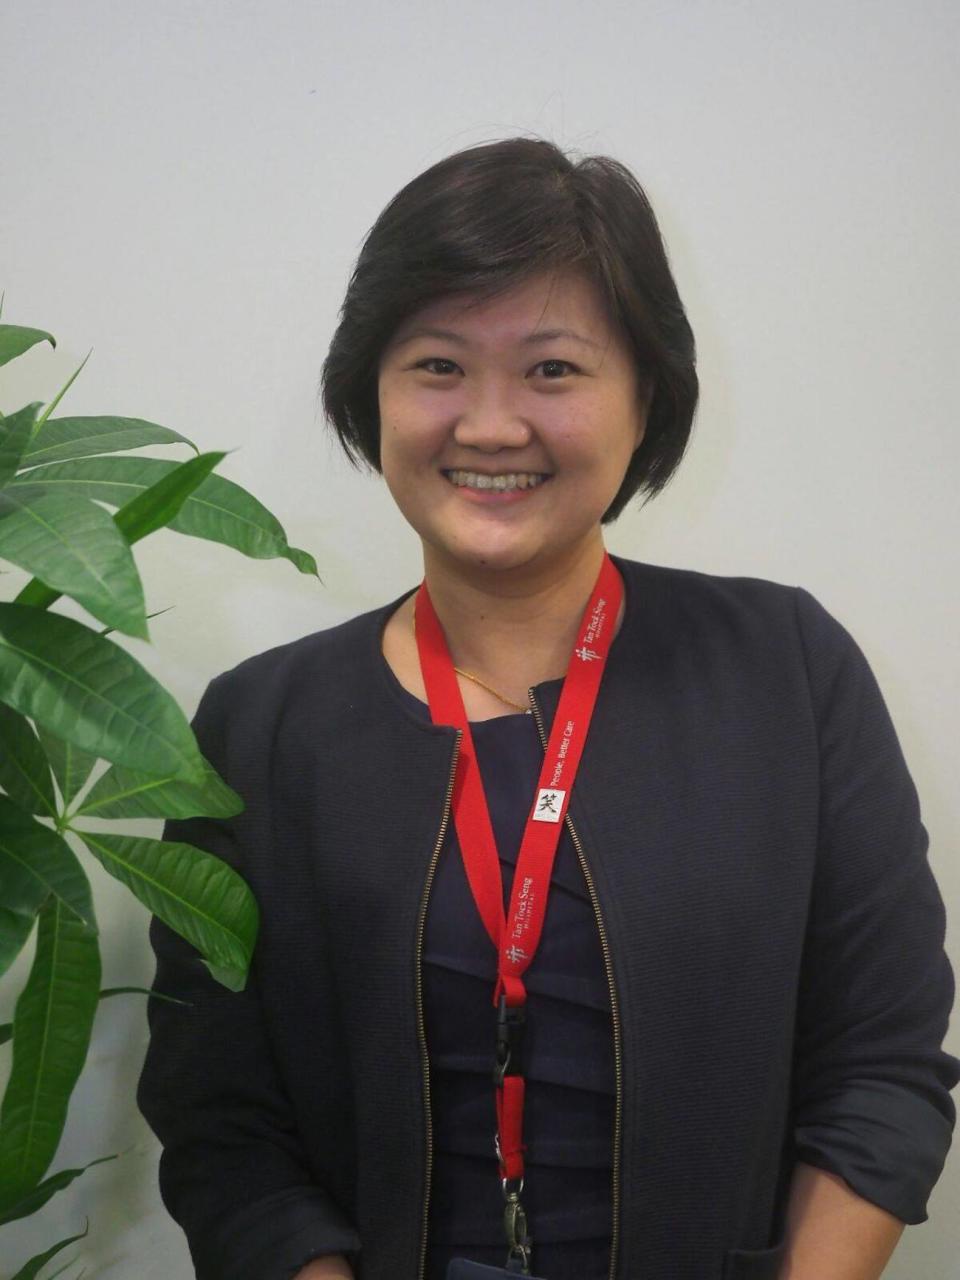 Laura Ho Pei Wah, Deputy Director of Nursing at Tan Tock Seng Hospital (TTSH) and a key member of the TTSH ABCD COVID Force, spearheaded the transformation of hospital facilities to meet the rising demand during the COVID-19 surge.